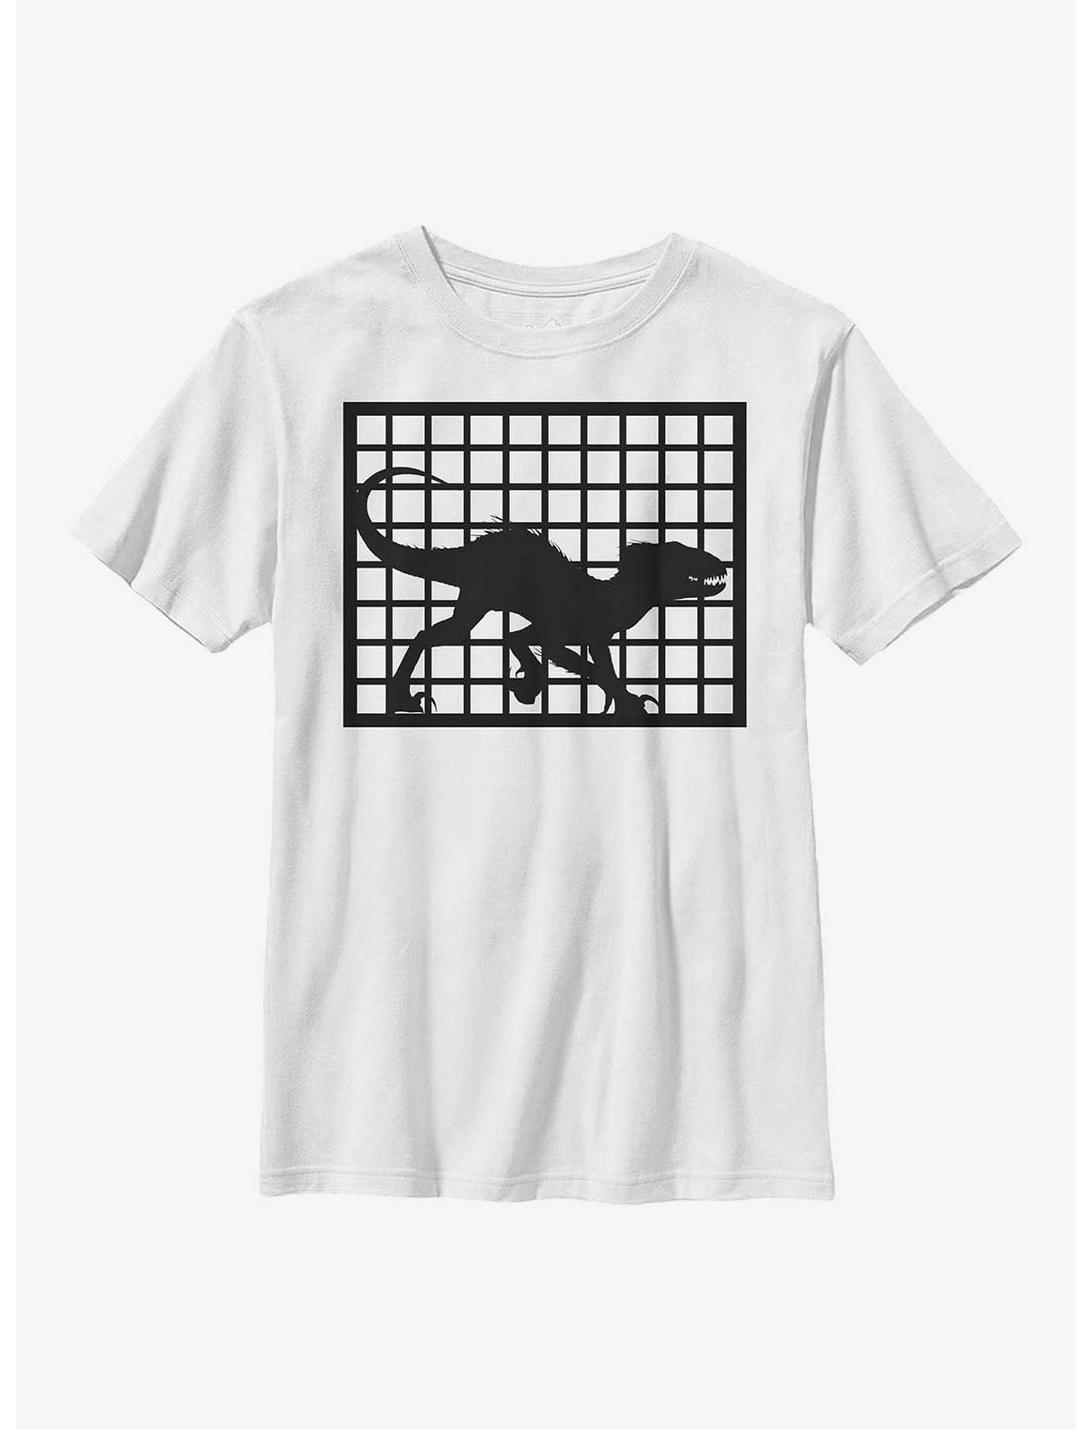 Jurassic Park Caged Indominus Youth T-Shirt, WHITE, hi-res